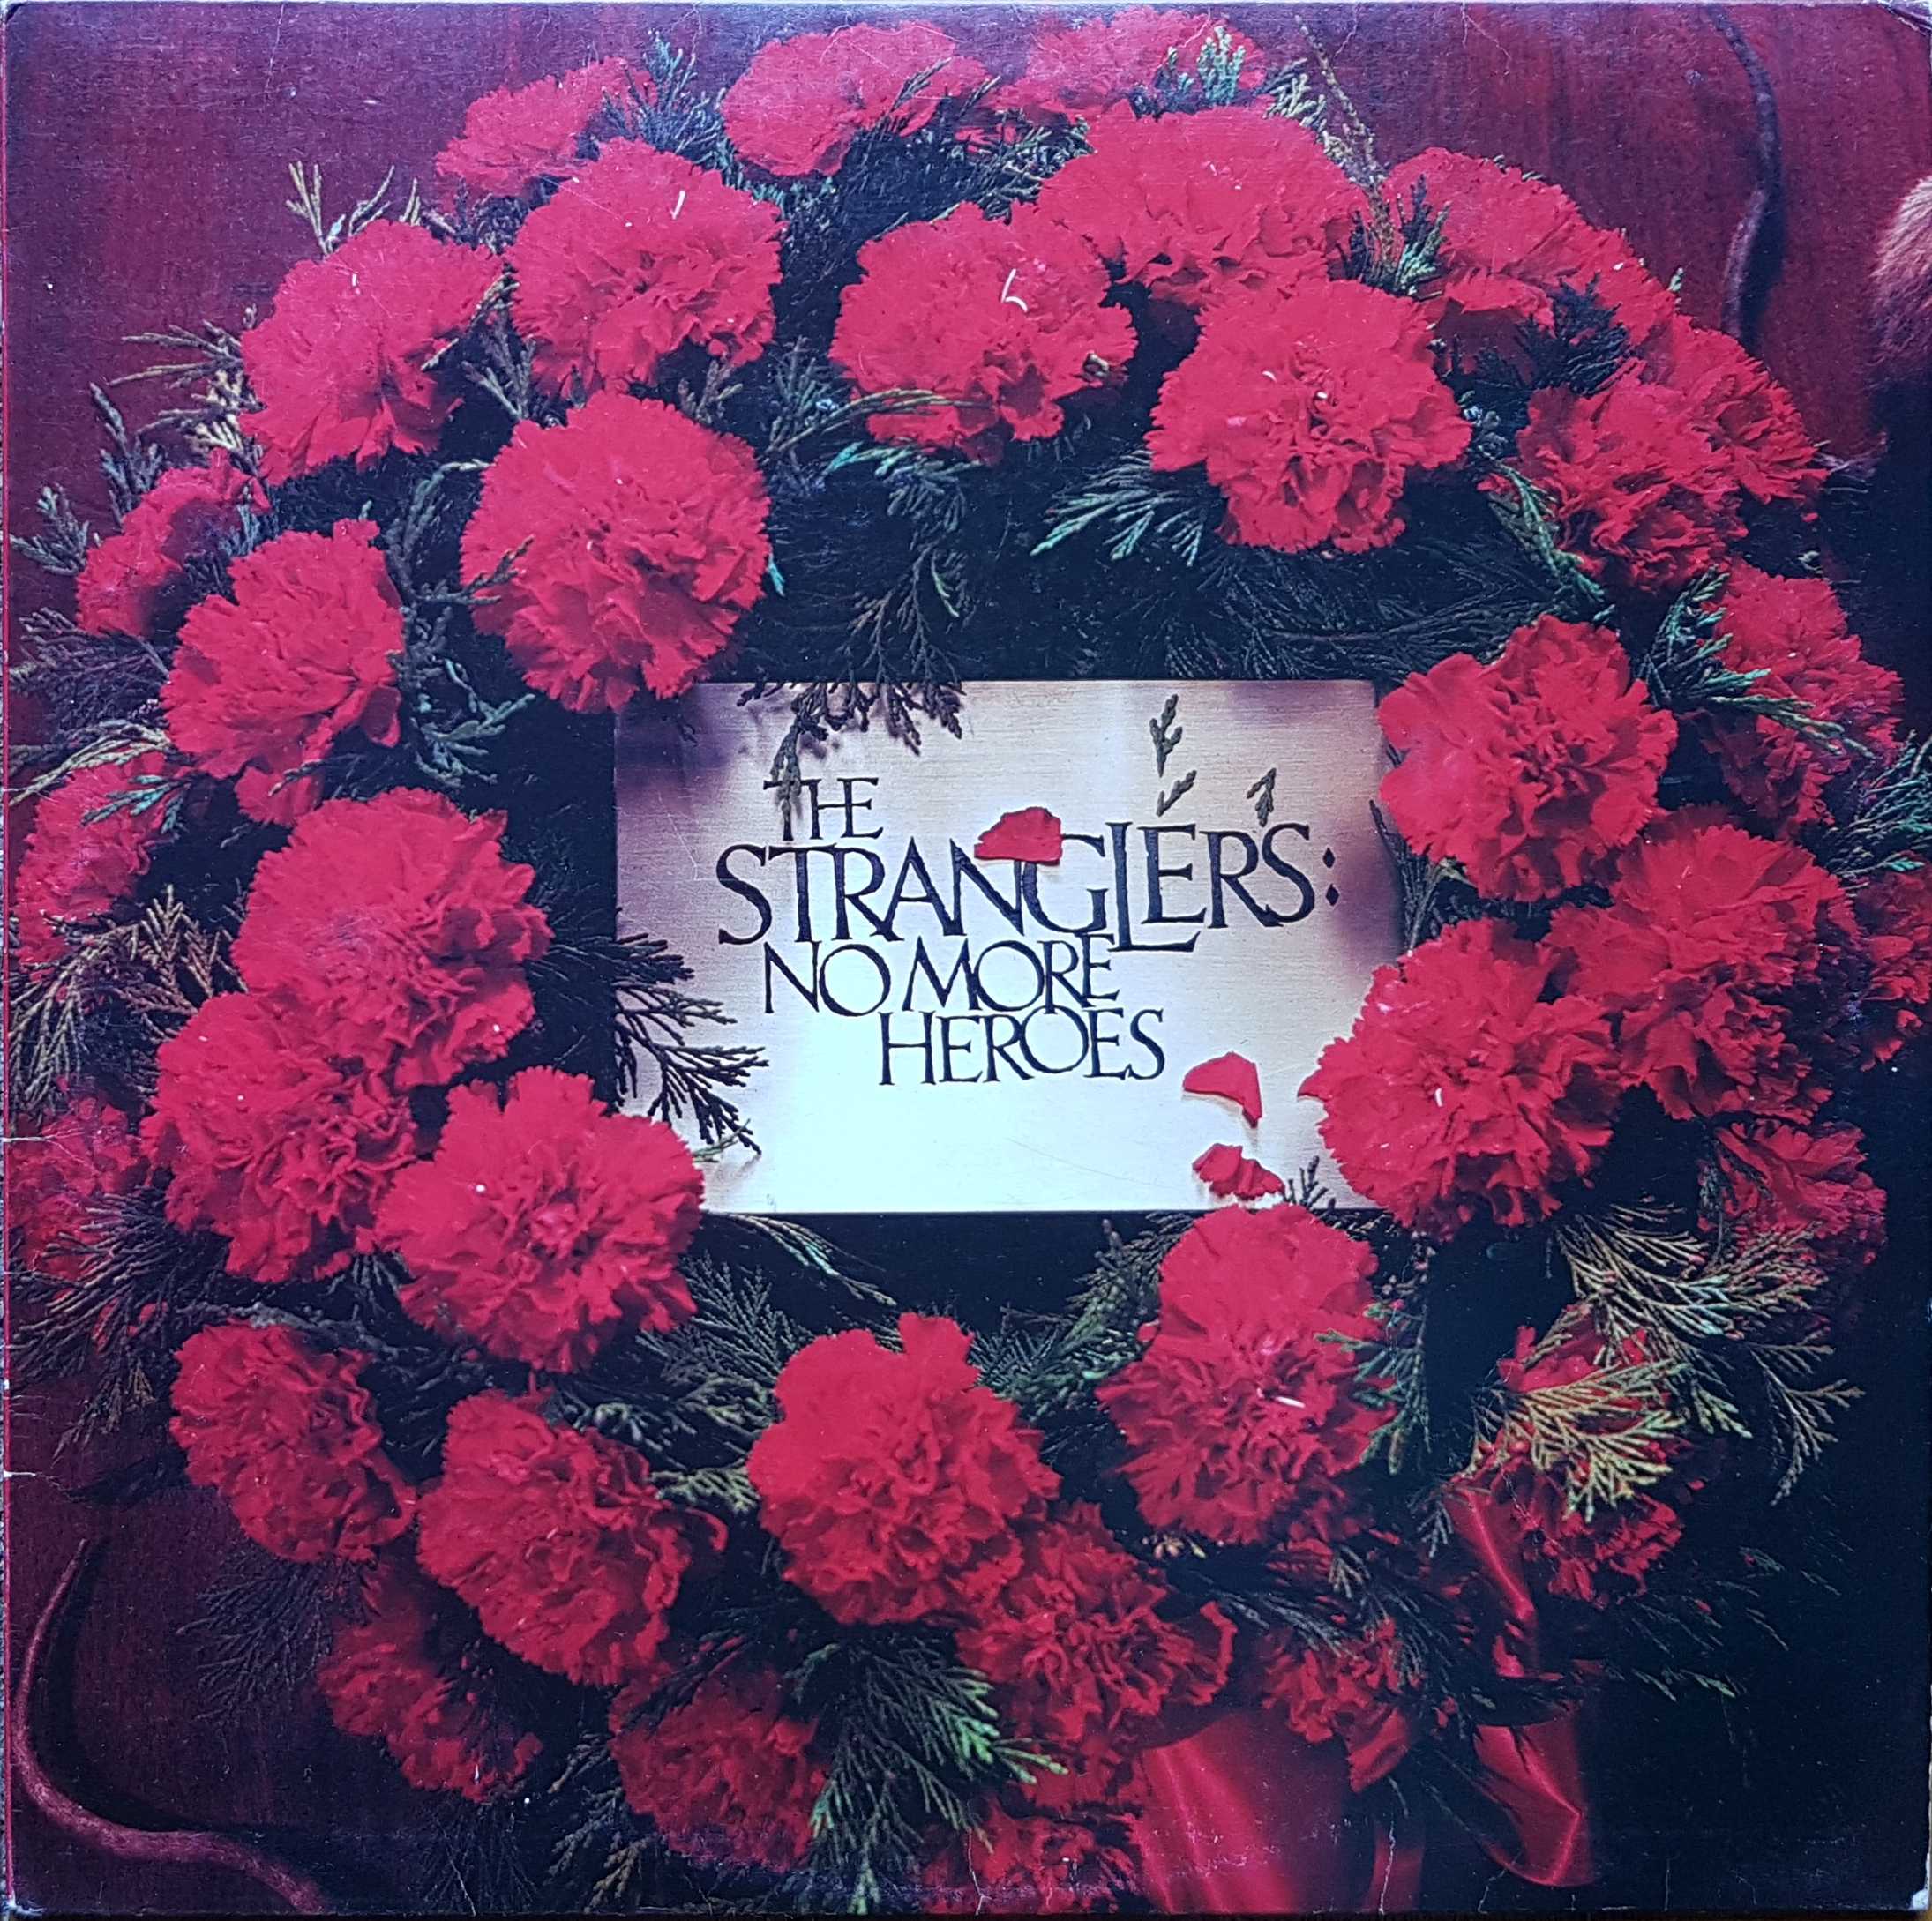 Picture of No more heroes by artist The Stranglers from The Stranglers albums